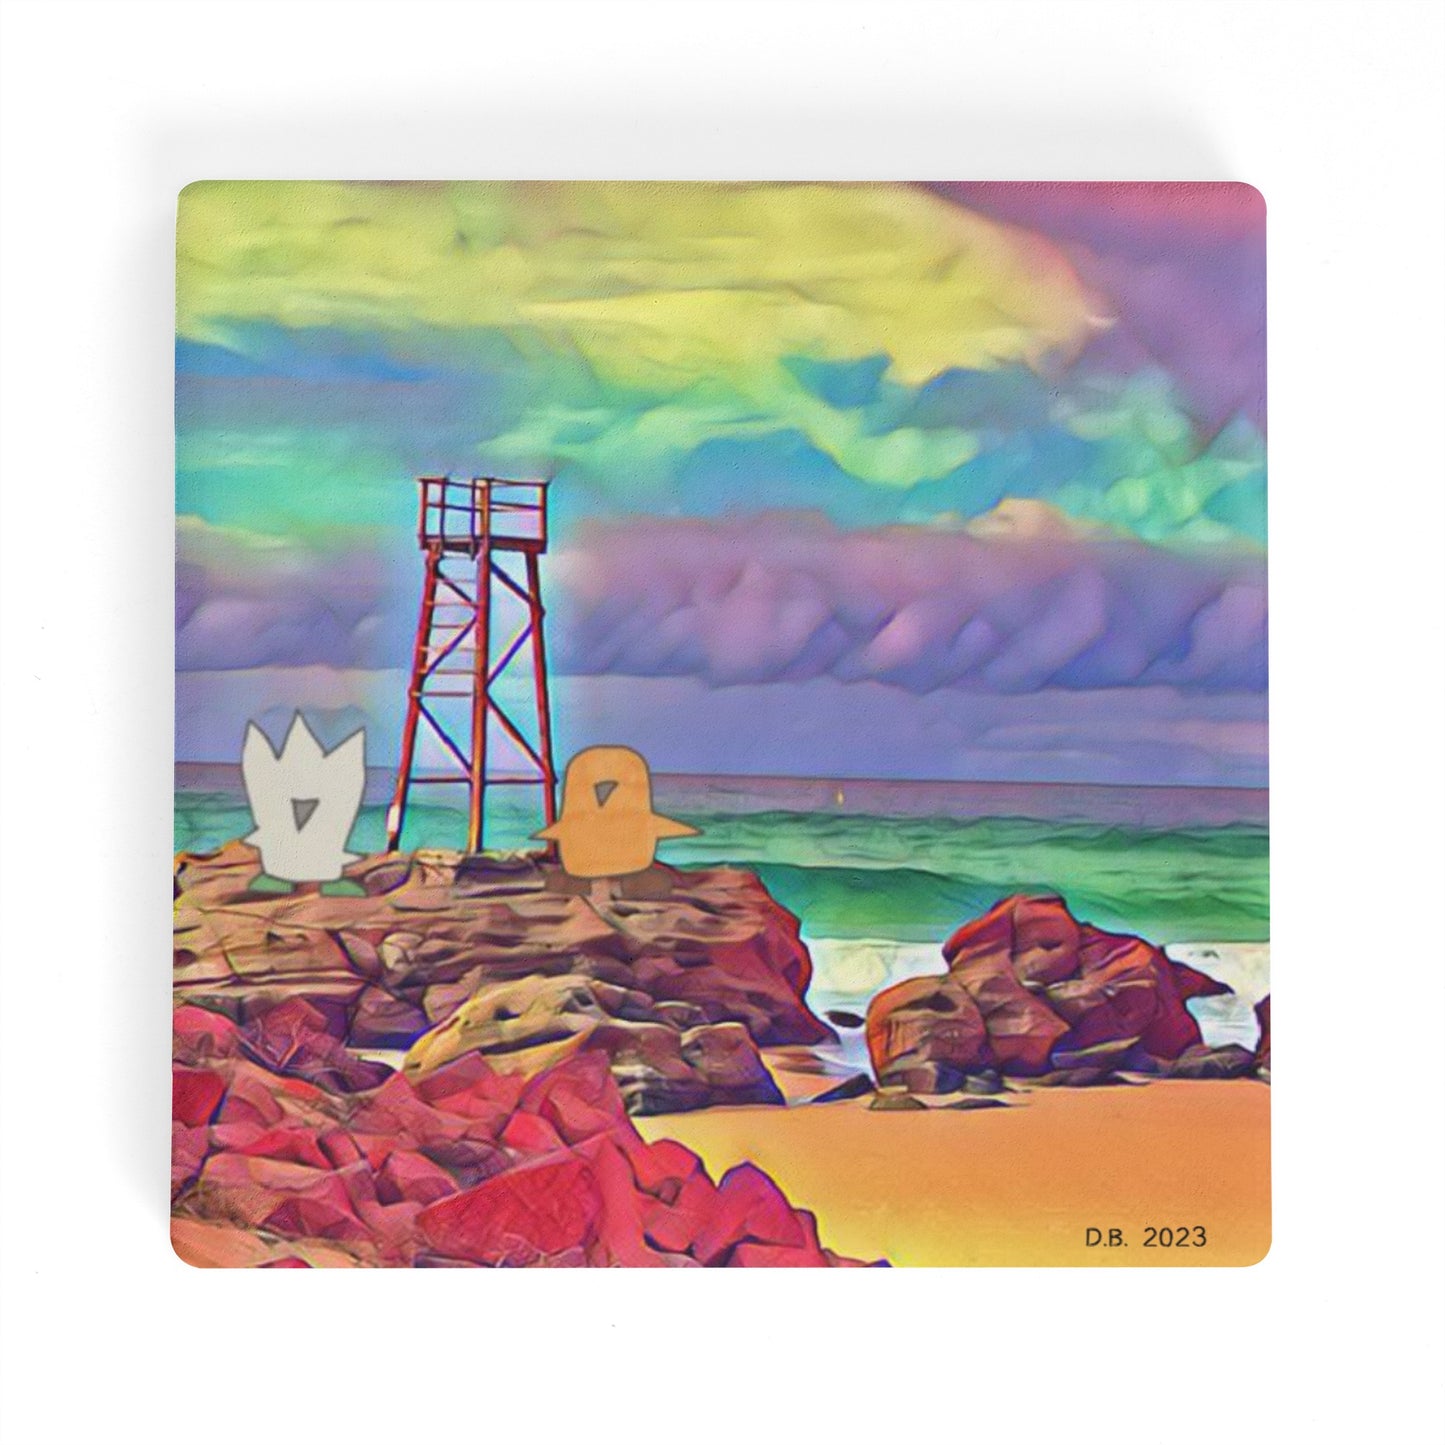 Fuzzy and Muffin Patrolling Redhead Beach by Artist D.B. Square Ceramic Coasters